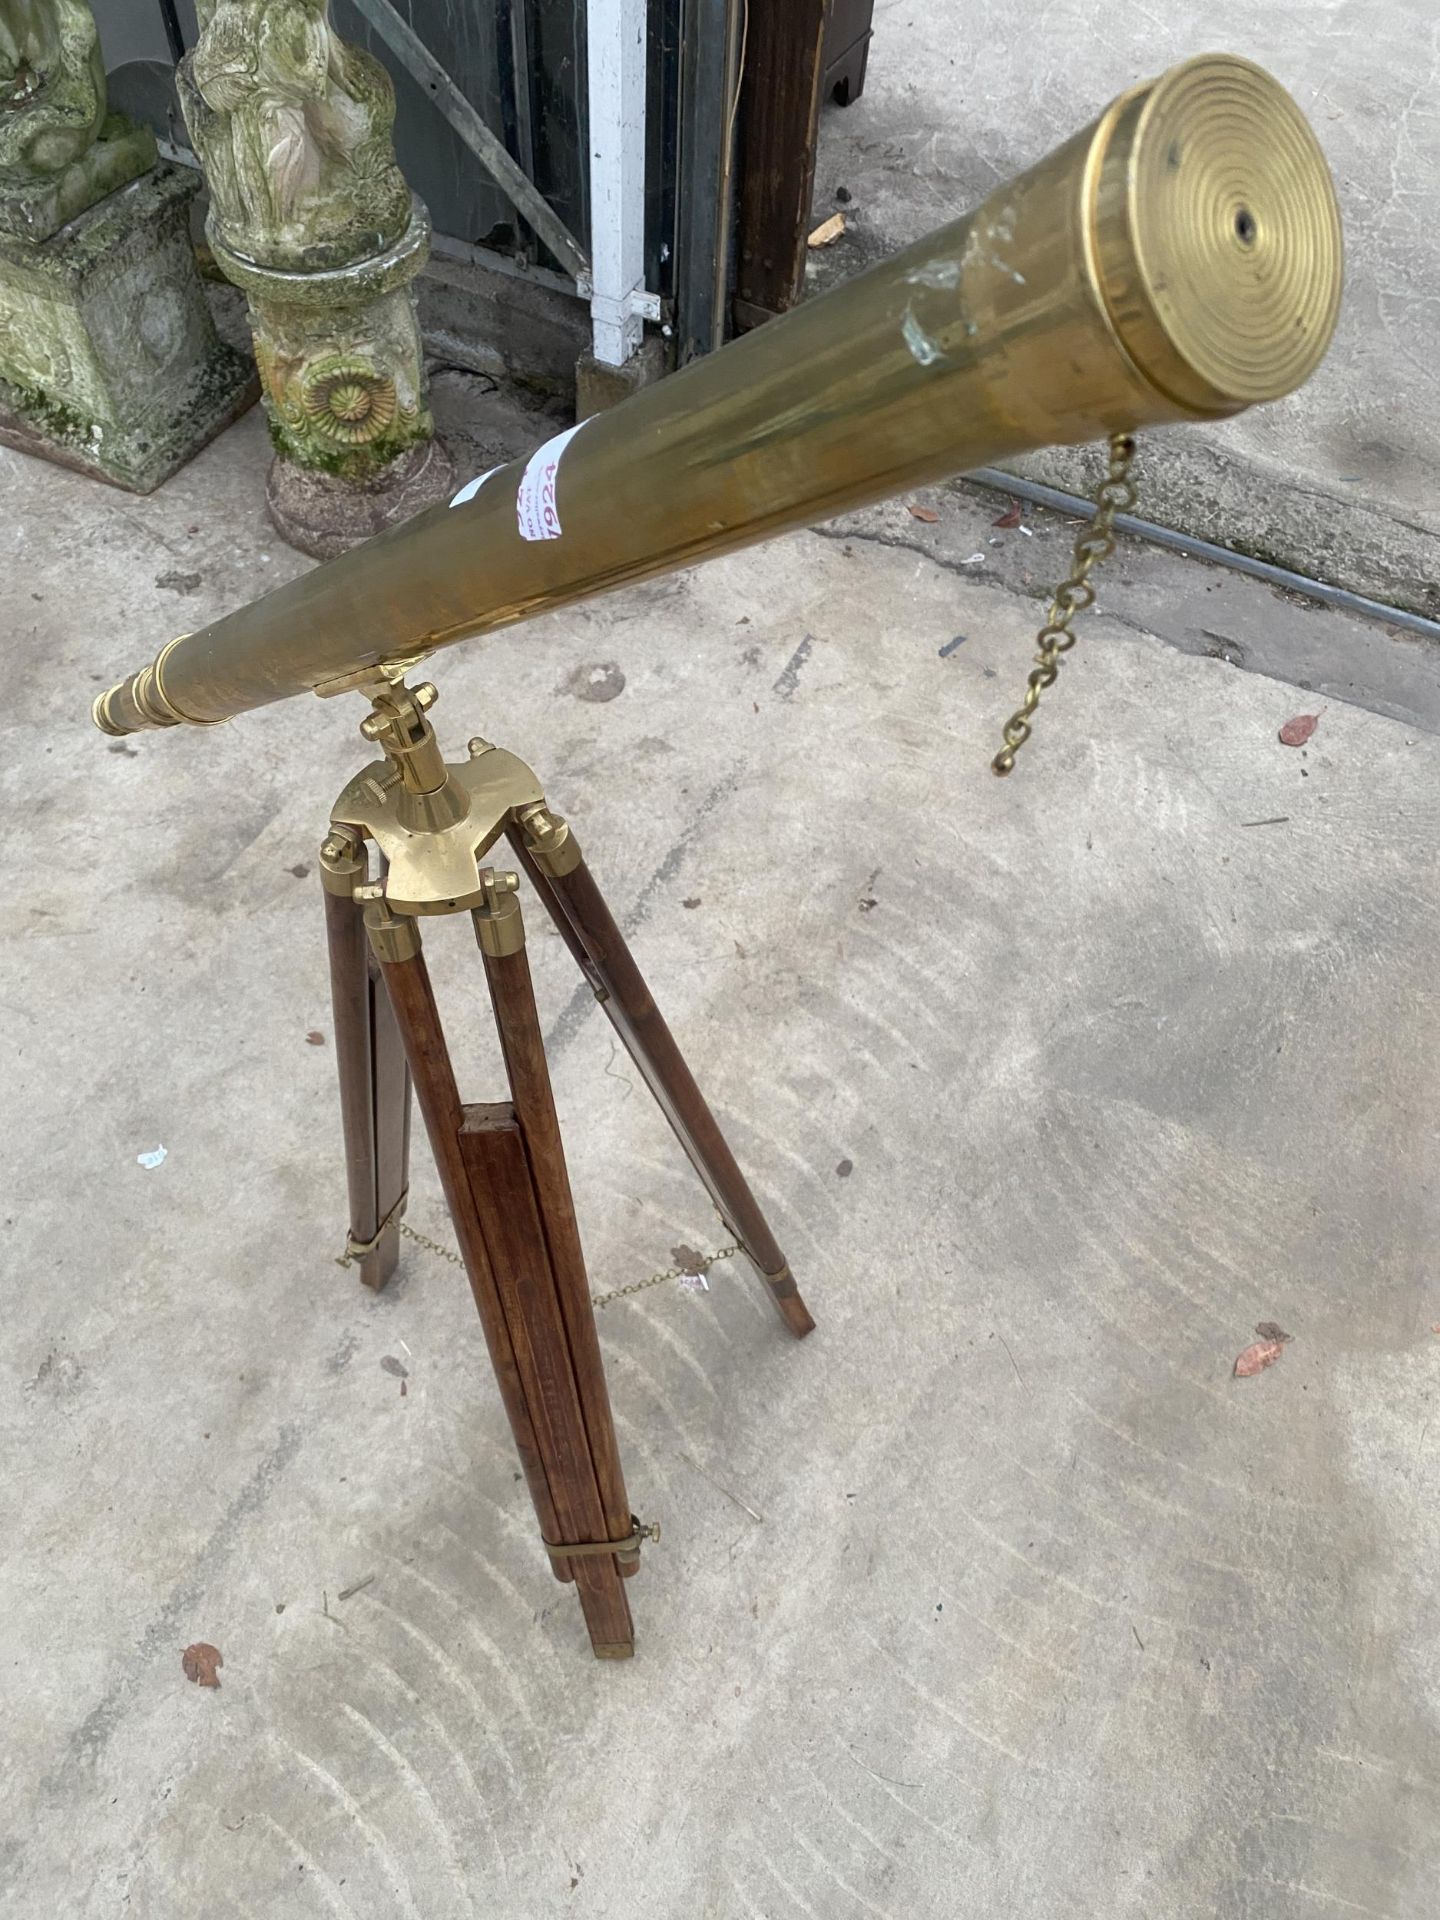 A VINTAGE BRASS TELESCOPE WITH WOODEN TRIPOD STAND - Image 2 of 5